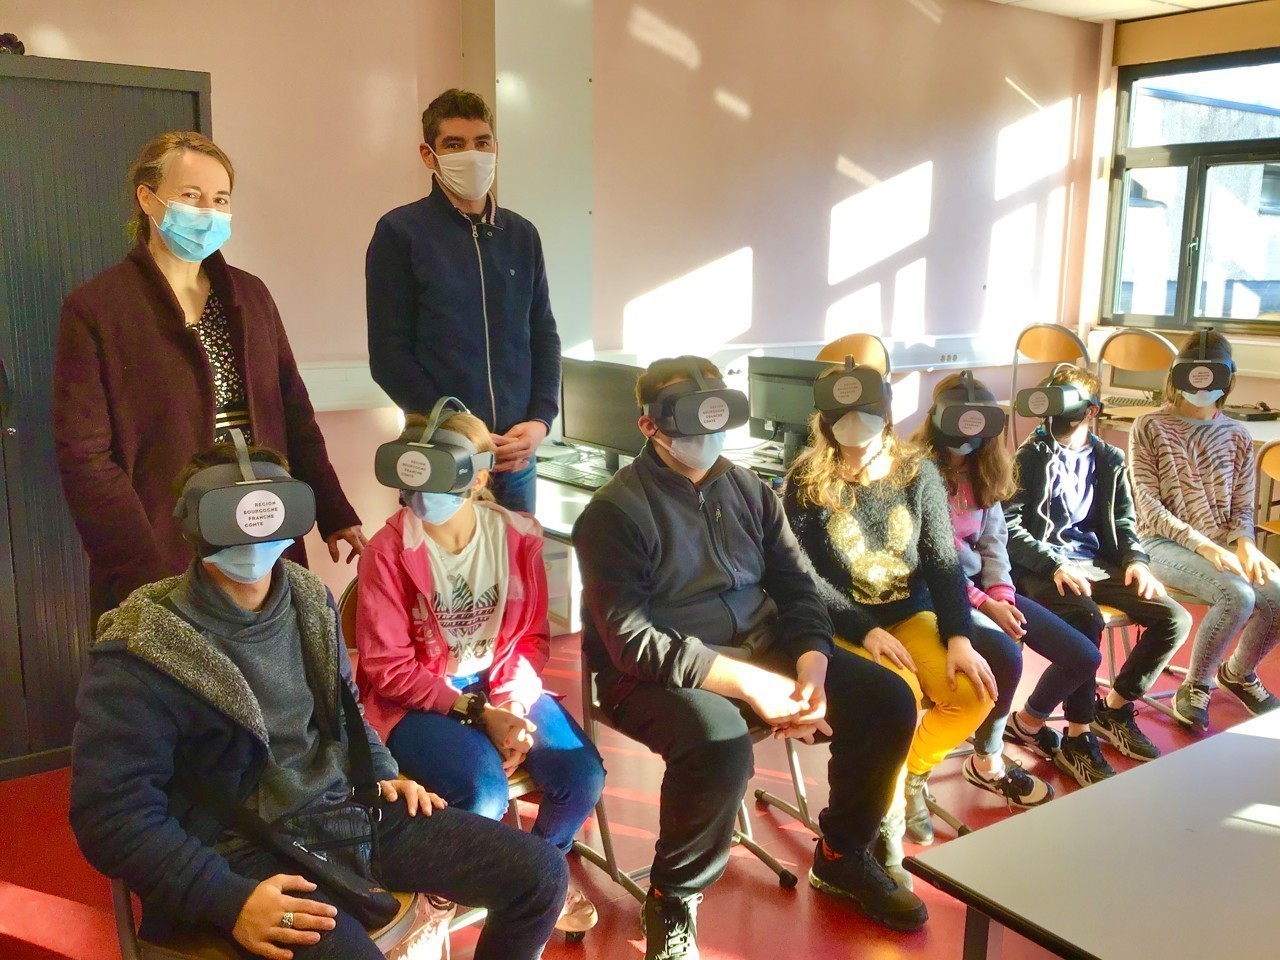 At the College Saint-Exupéry in Lons-le-Saunier, we test jobs with virtual reality headsets